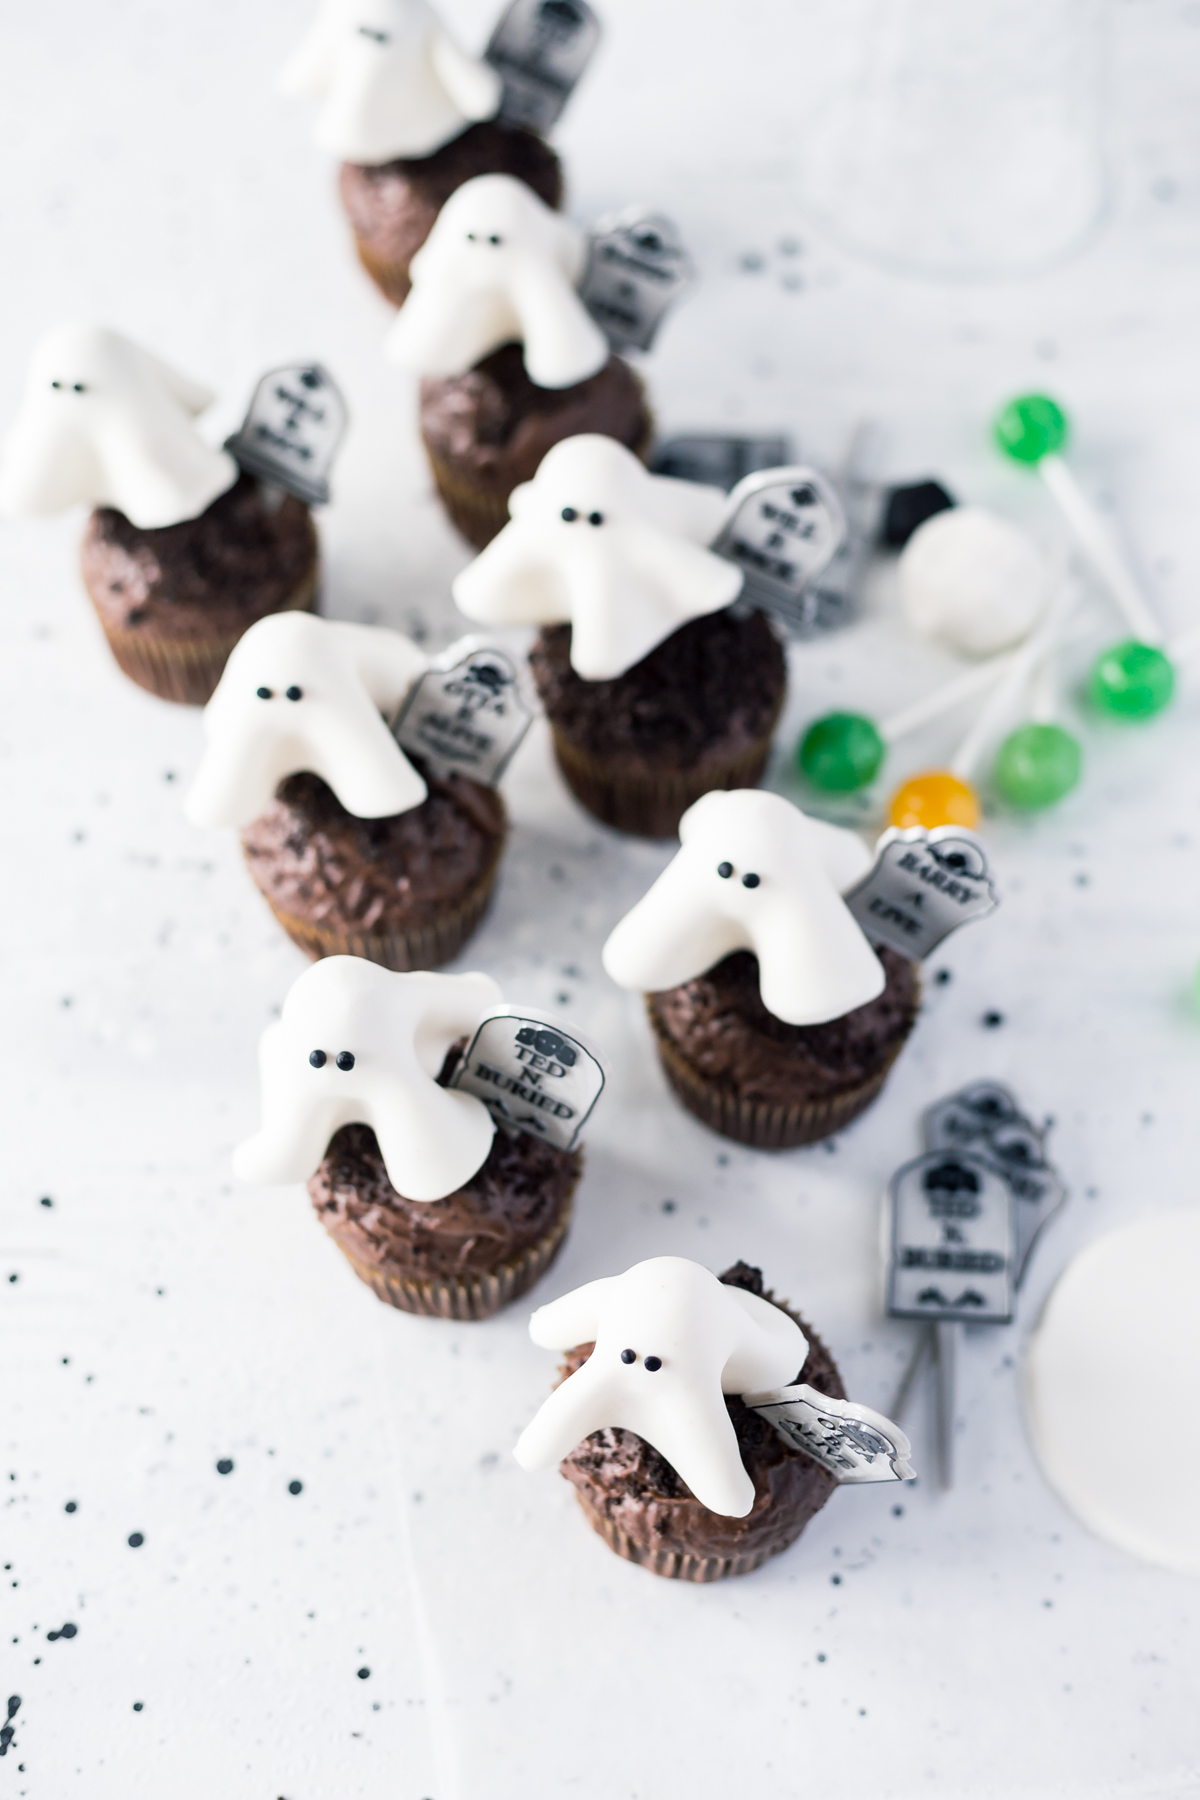 Floating Ghost Cupcakes